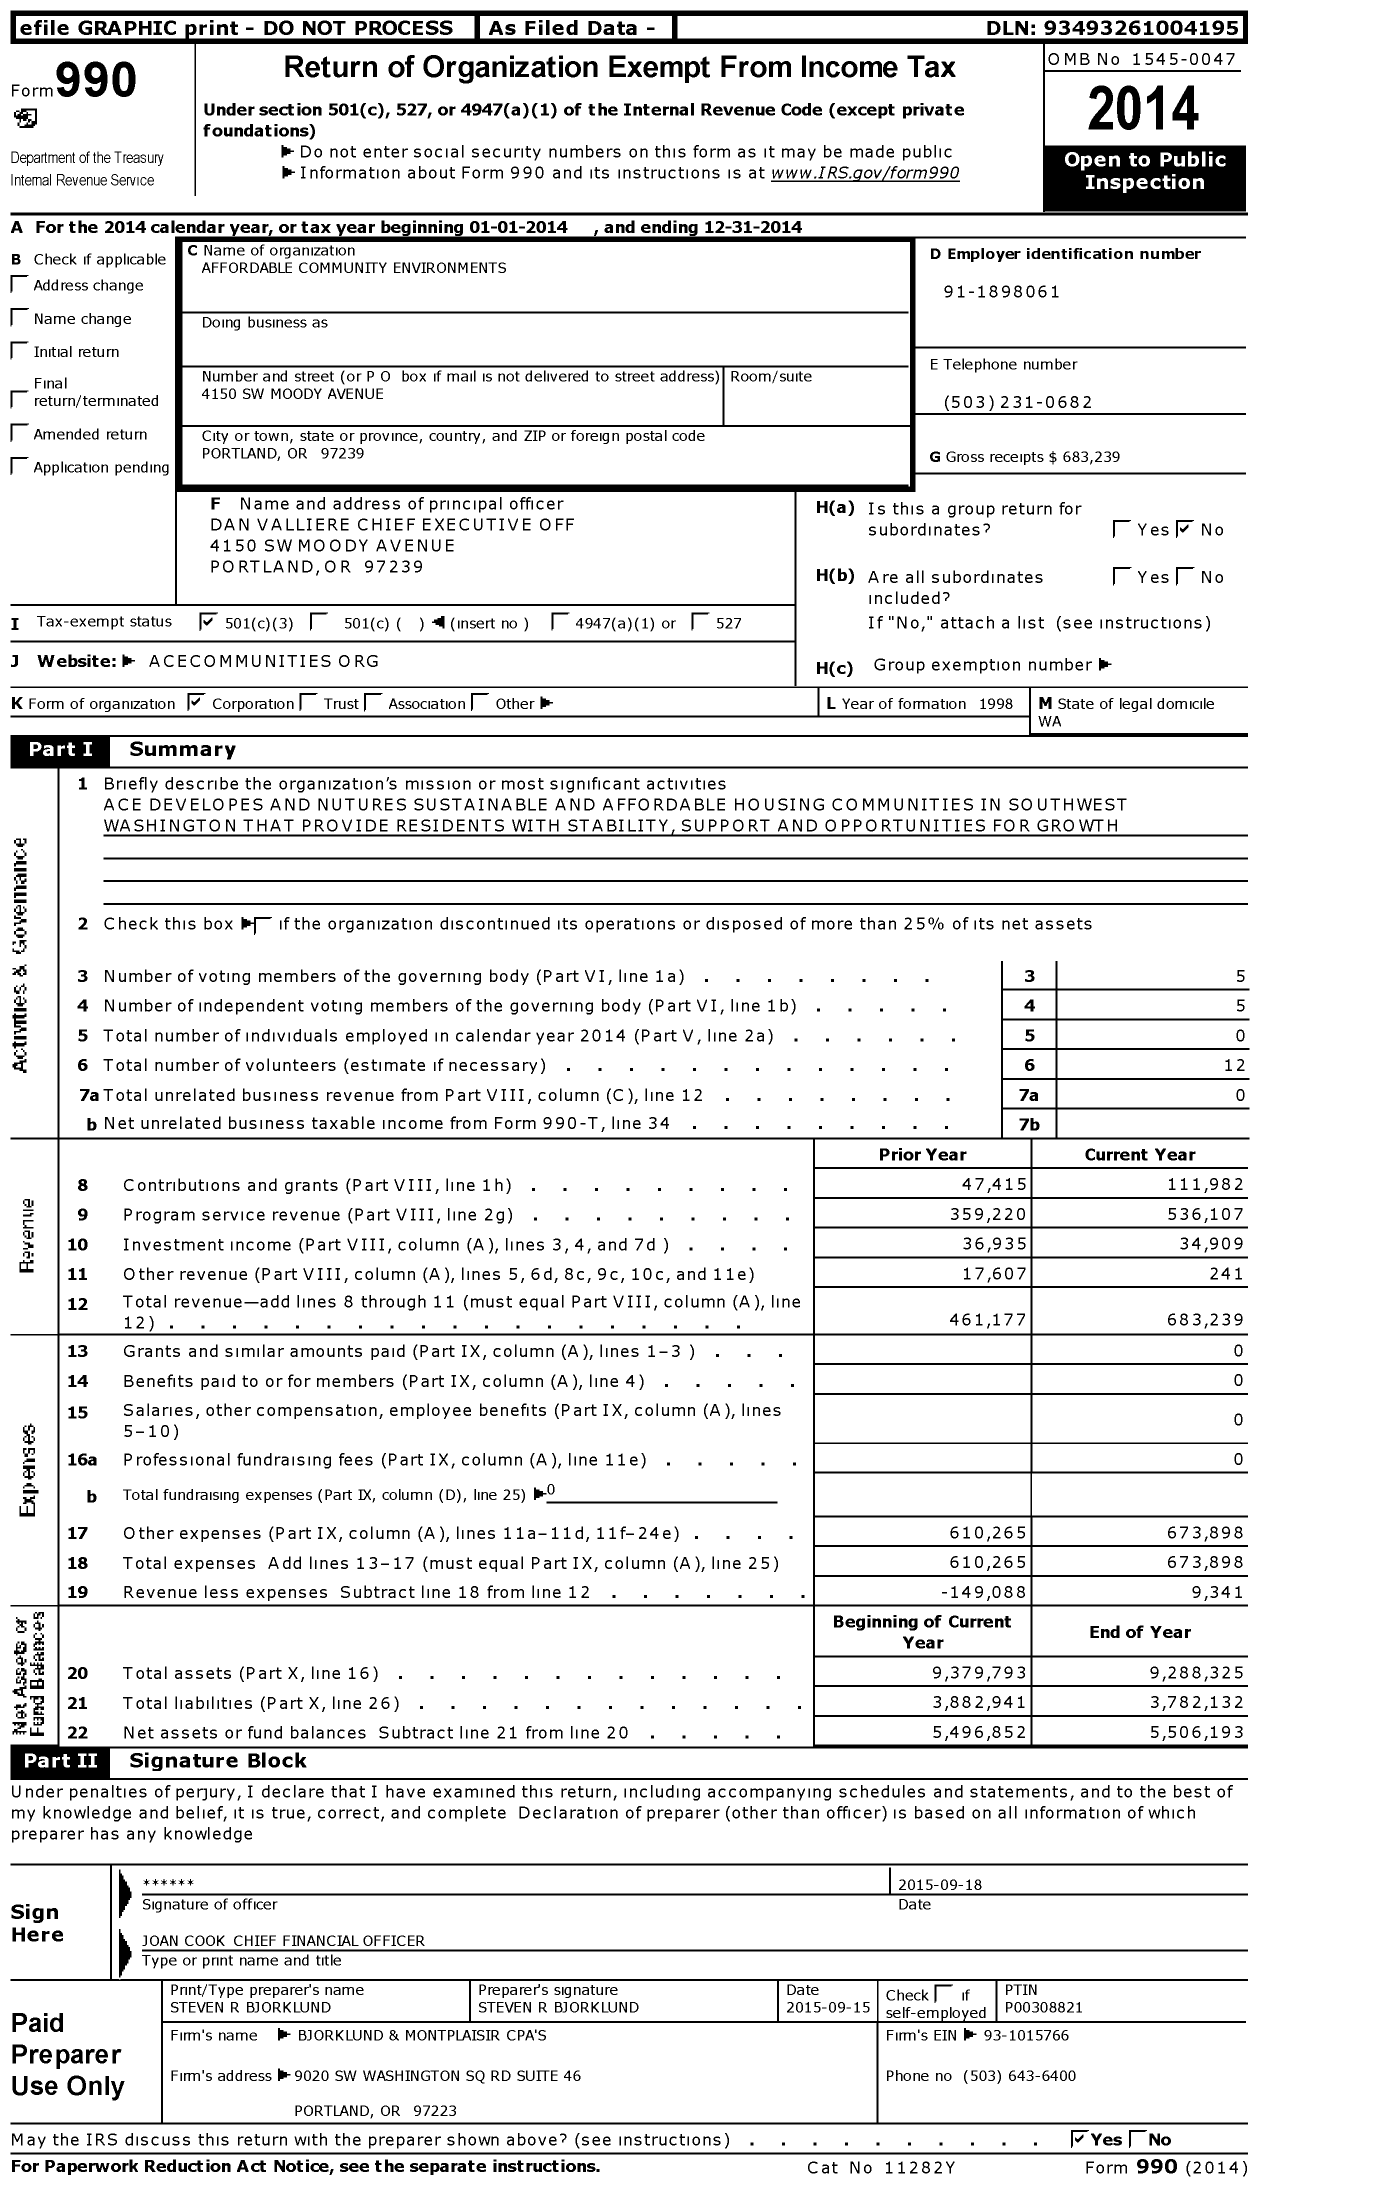 Image of first page of 2014 Form 990 for Affordable Community Environments